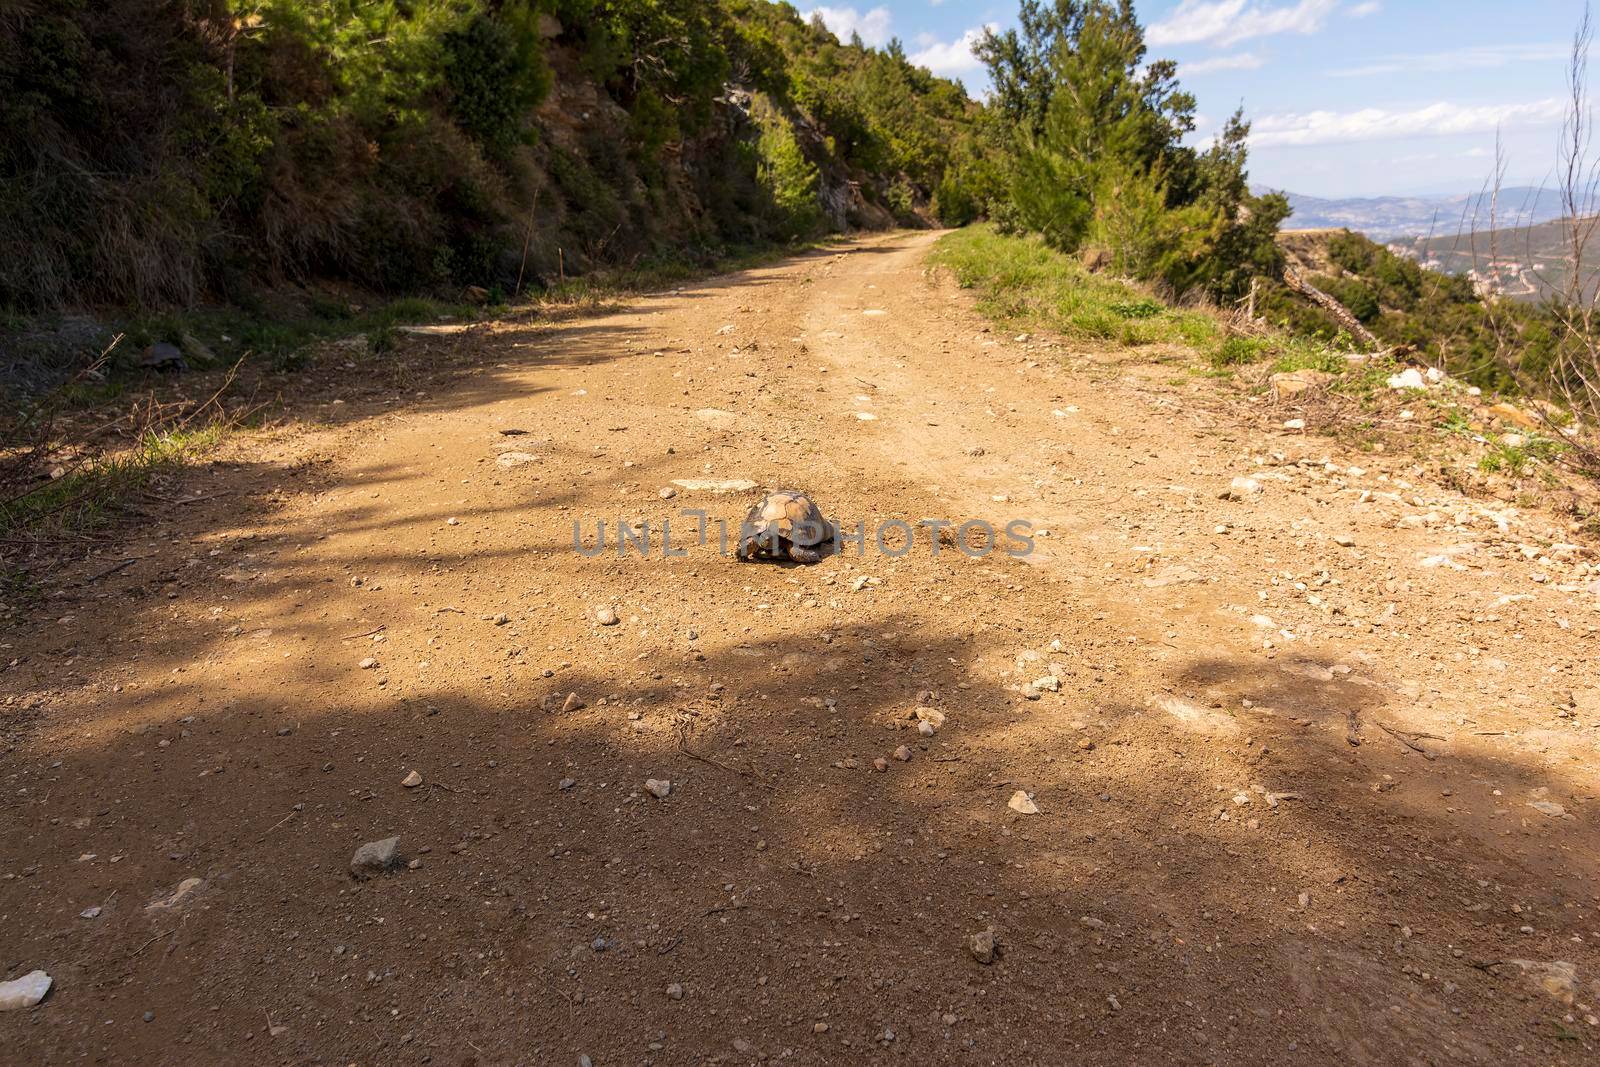 A patient turtle traveling on a dirt road by ankarb